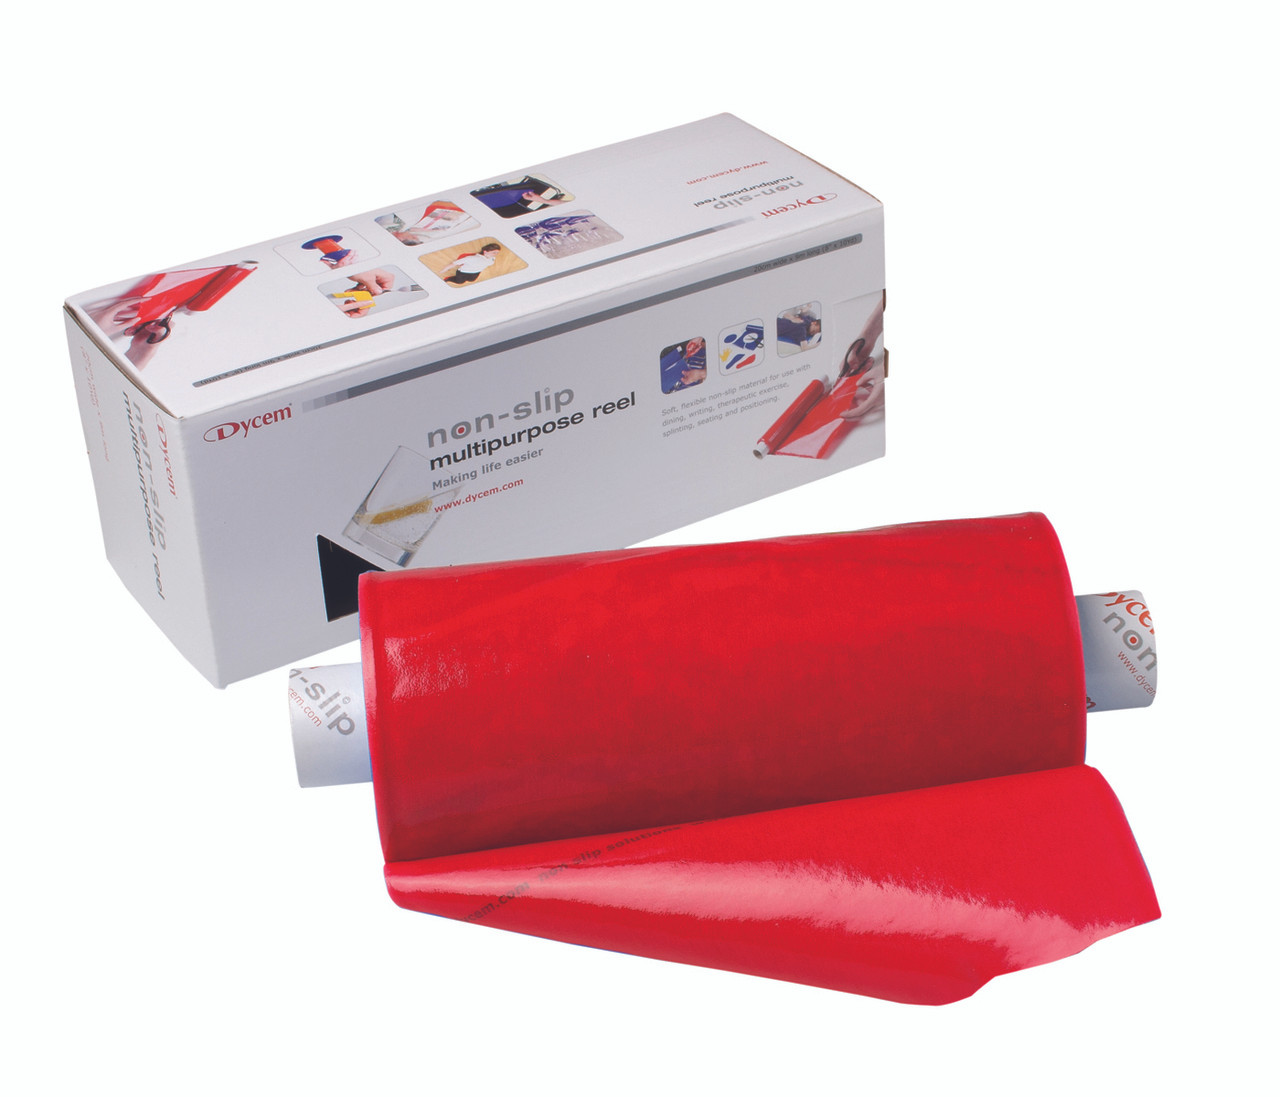 Dycem¨ non-slip material, roll, 8"x10 yard, red